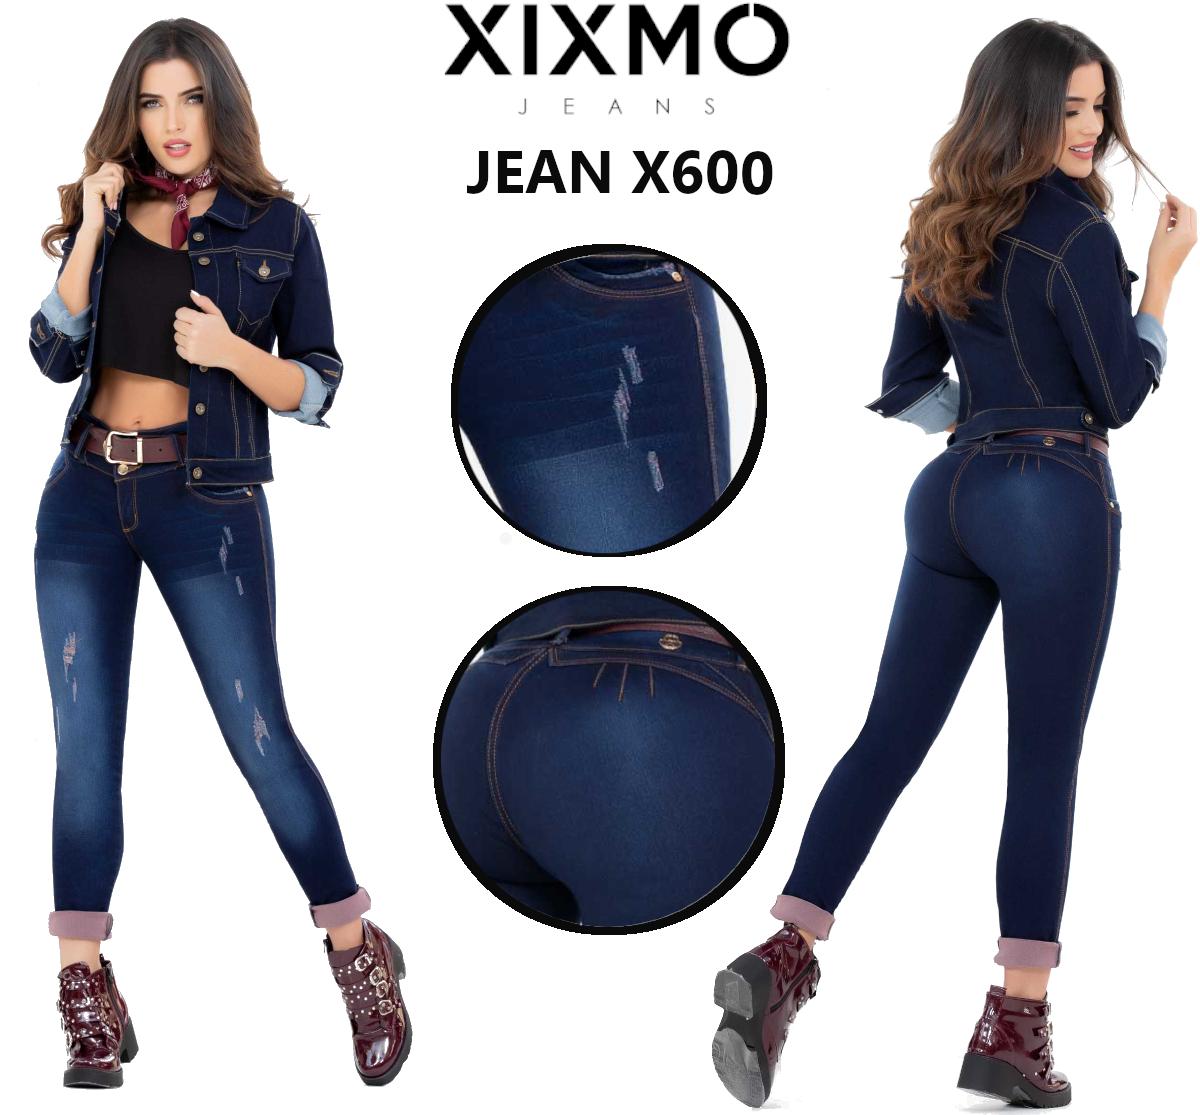 Colombian Fashion Push Up Jean with enhancement